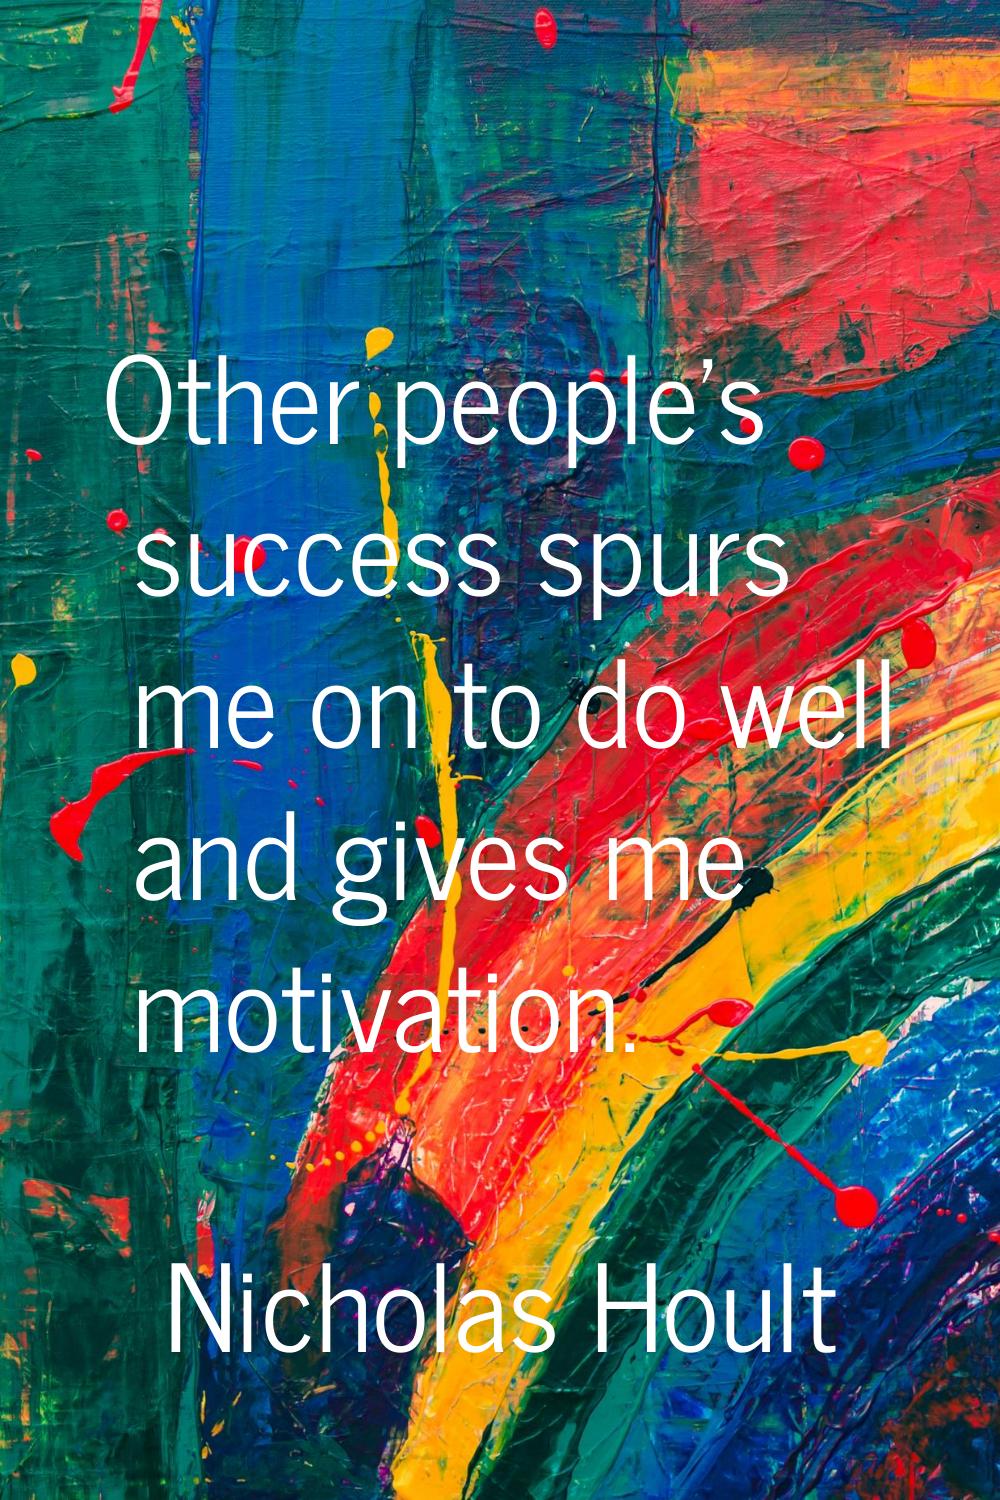 Other people's success spurs me on to do well and gives me motivation.